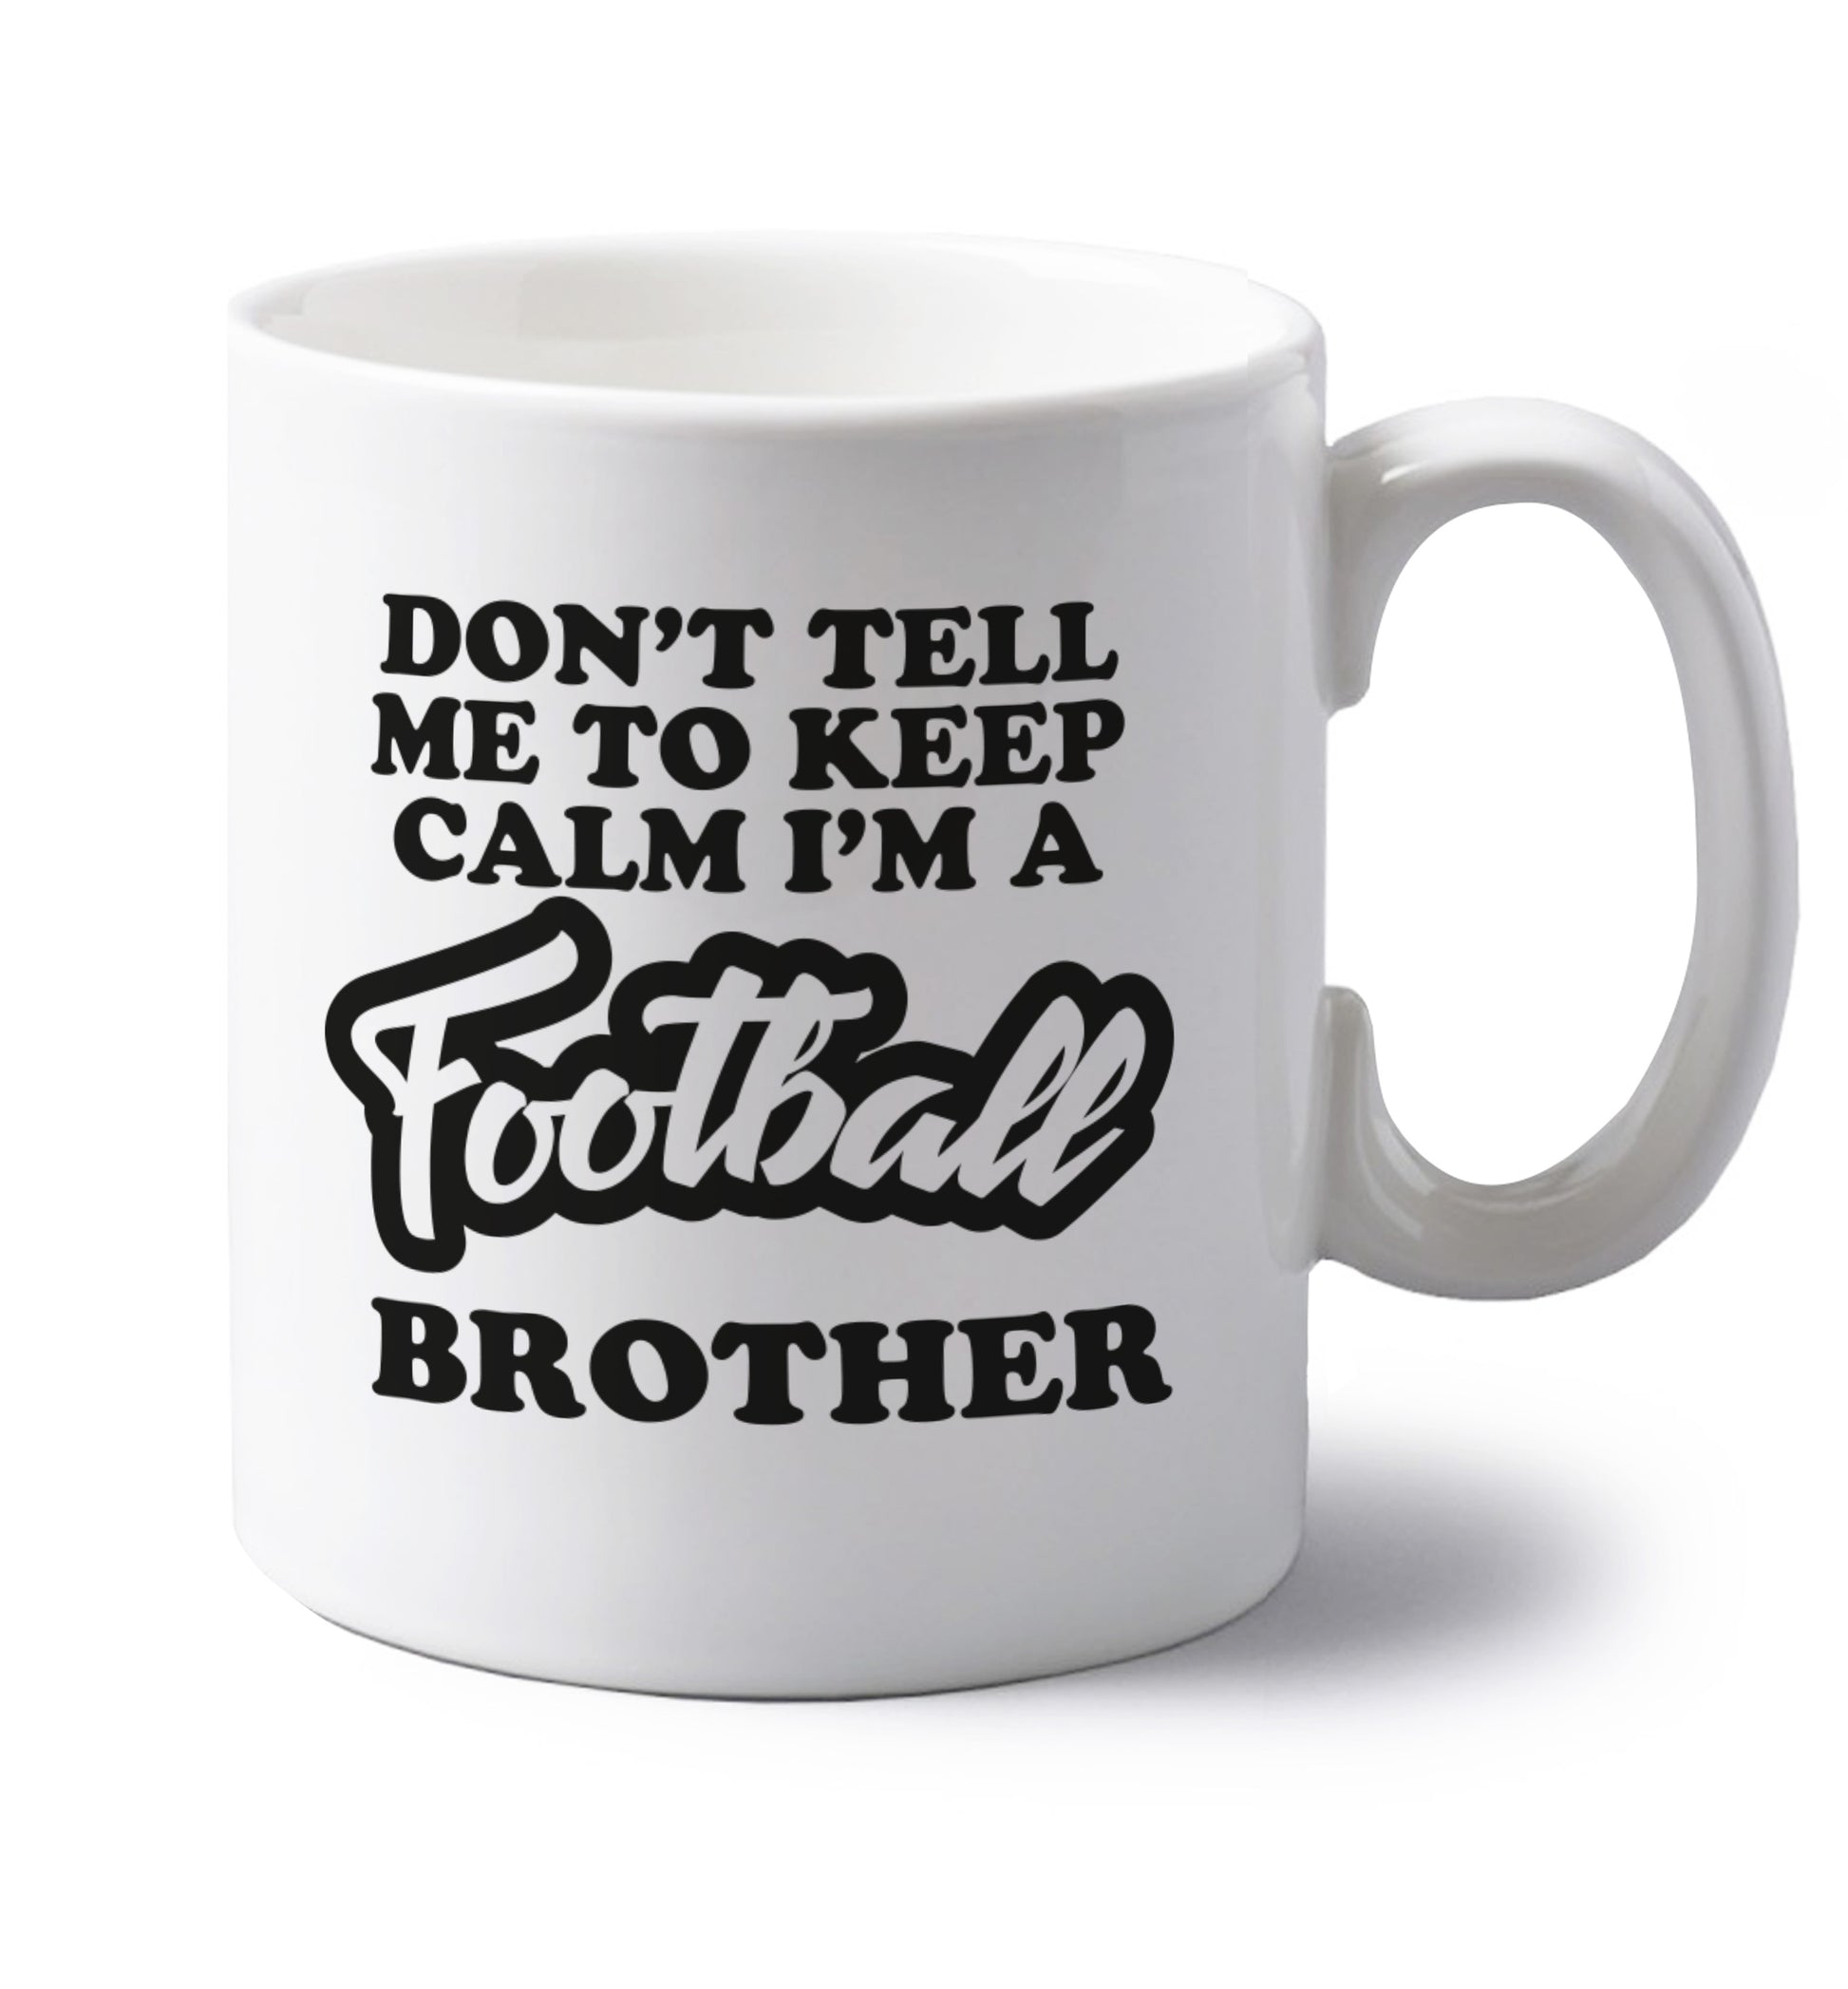 Don't tell me to keep calm I'm a football brother left handed white ceramic mug 